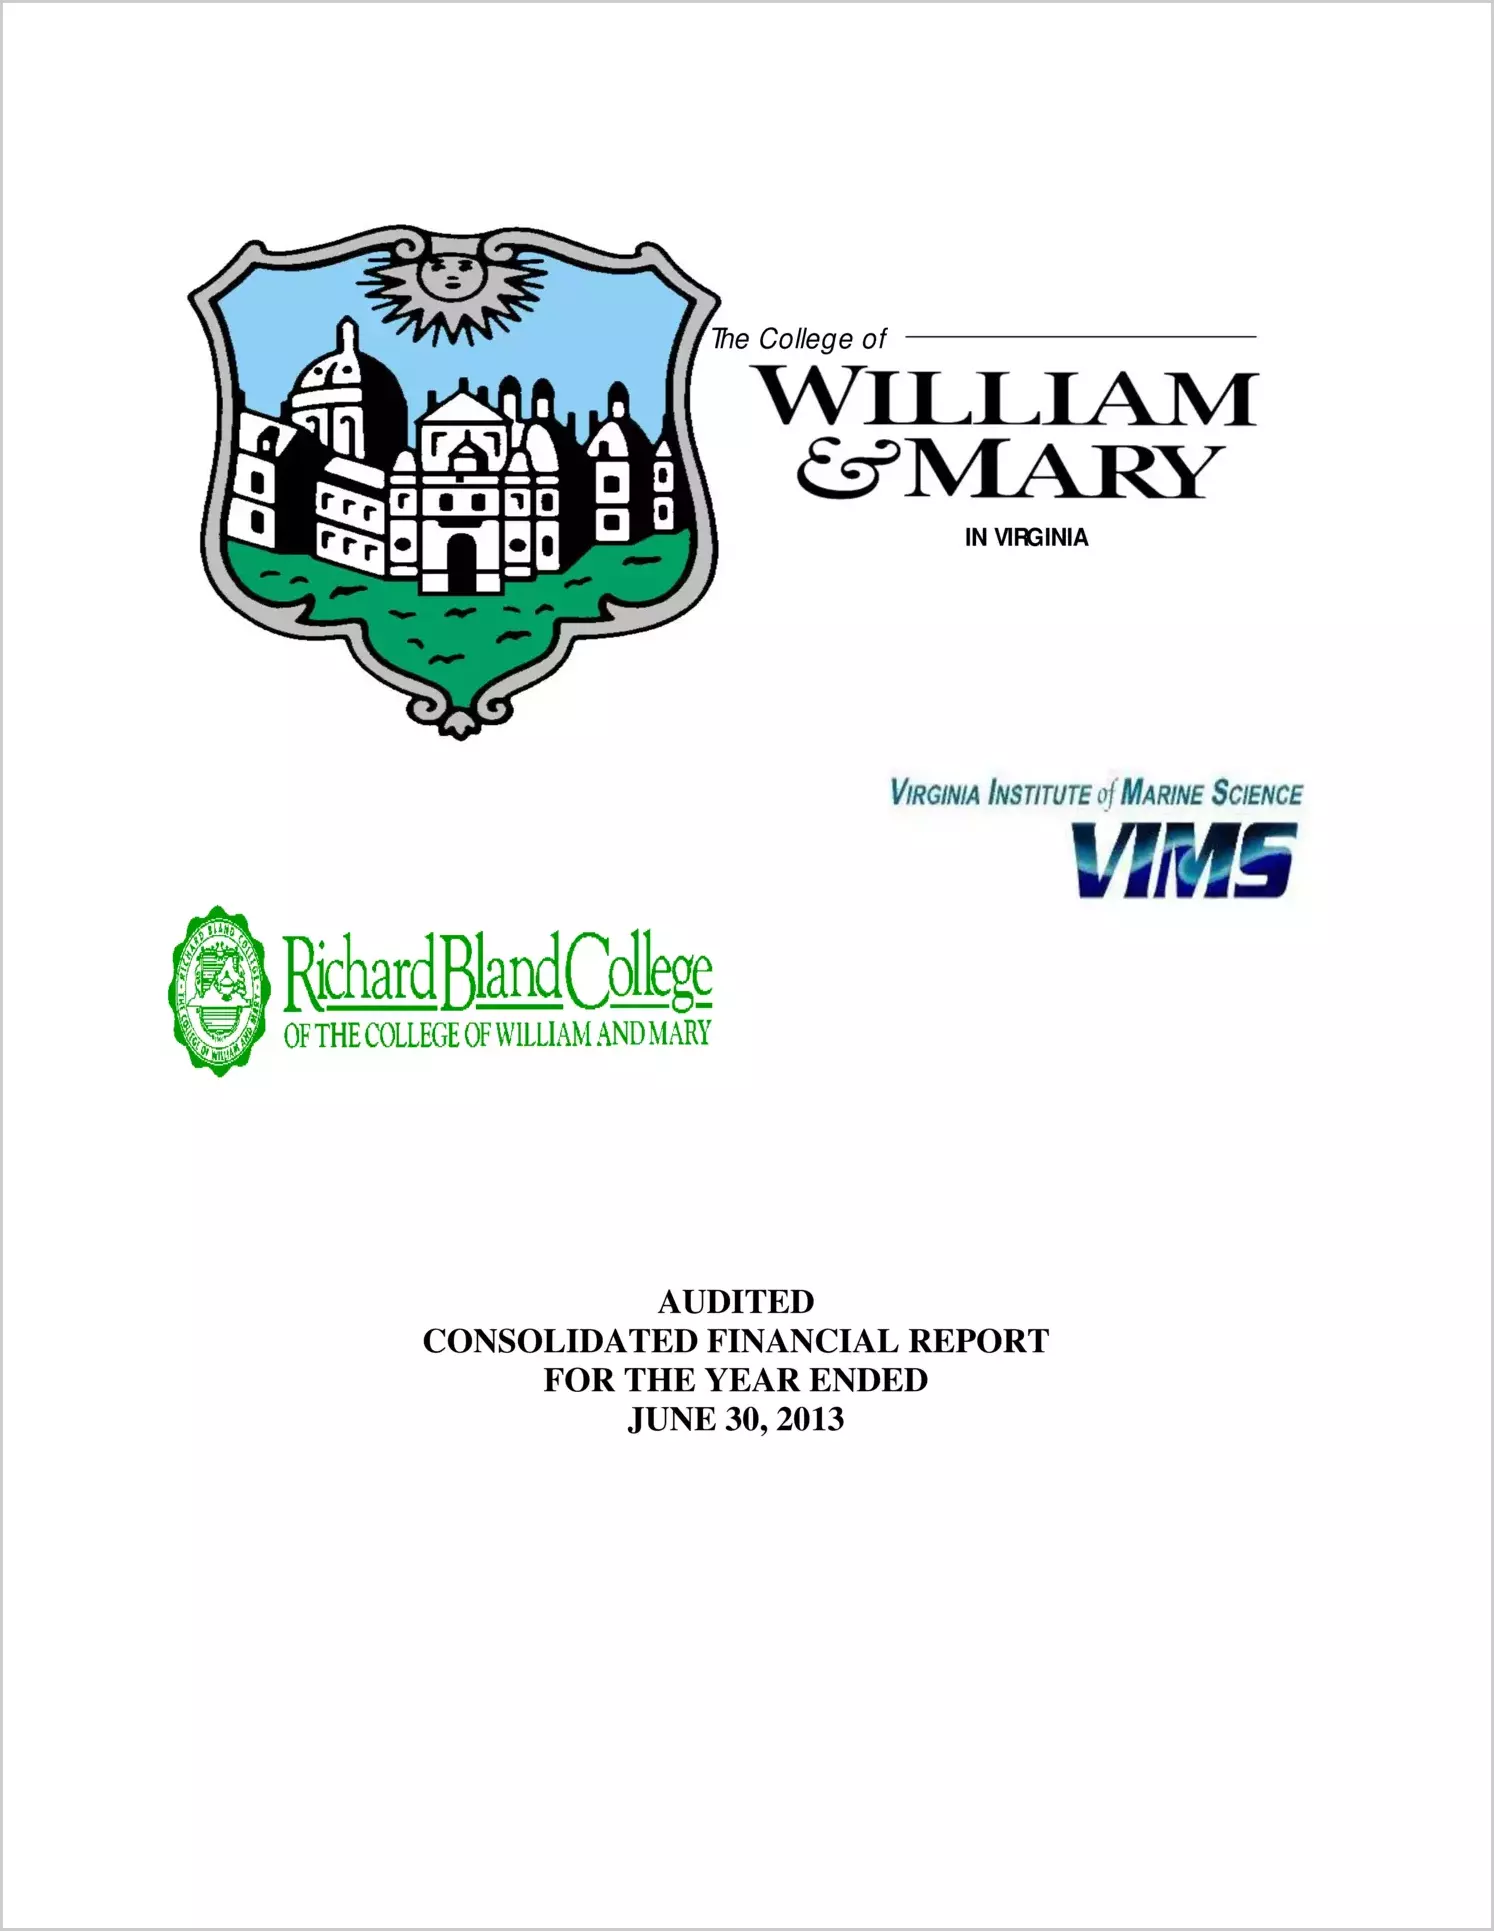 William & Mary, Virginia Institute of Marine Science, and Richard Bland College Financial Statements for the year ended June 30, 2013